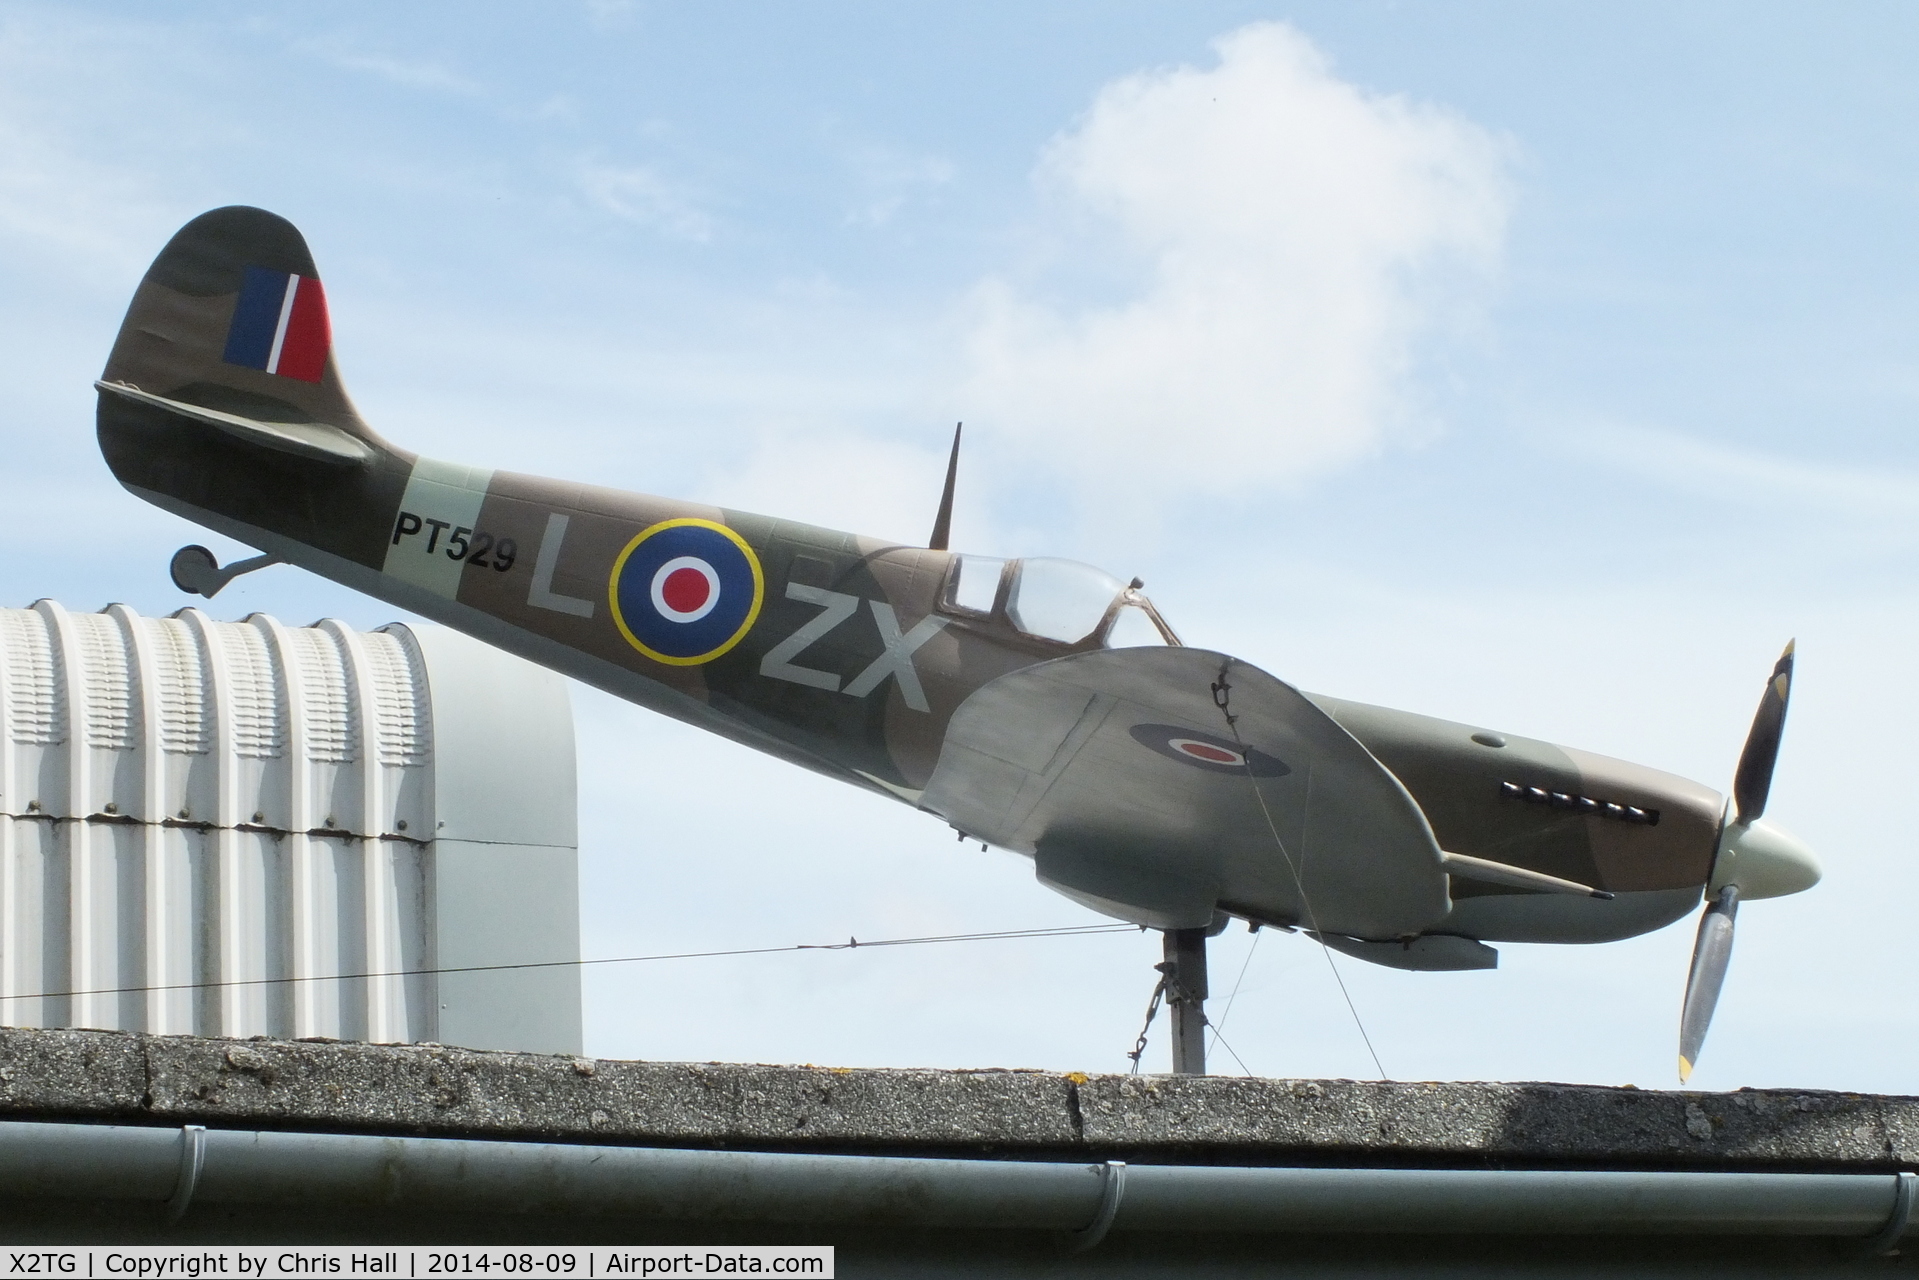 X2TG Airport - large scale model Spitfire on the roof of the Tangmere Military Aviation Museum